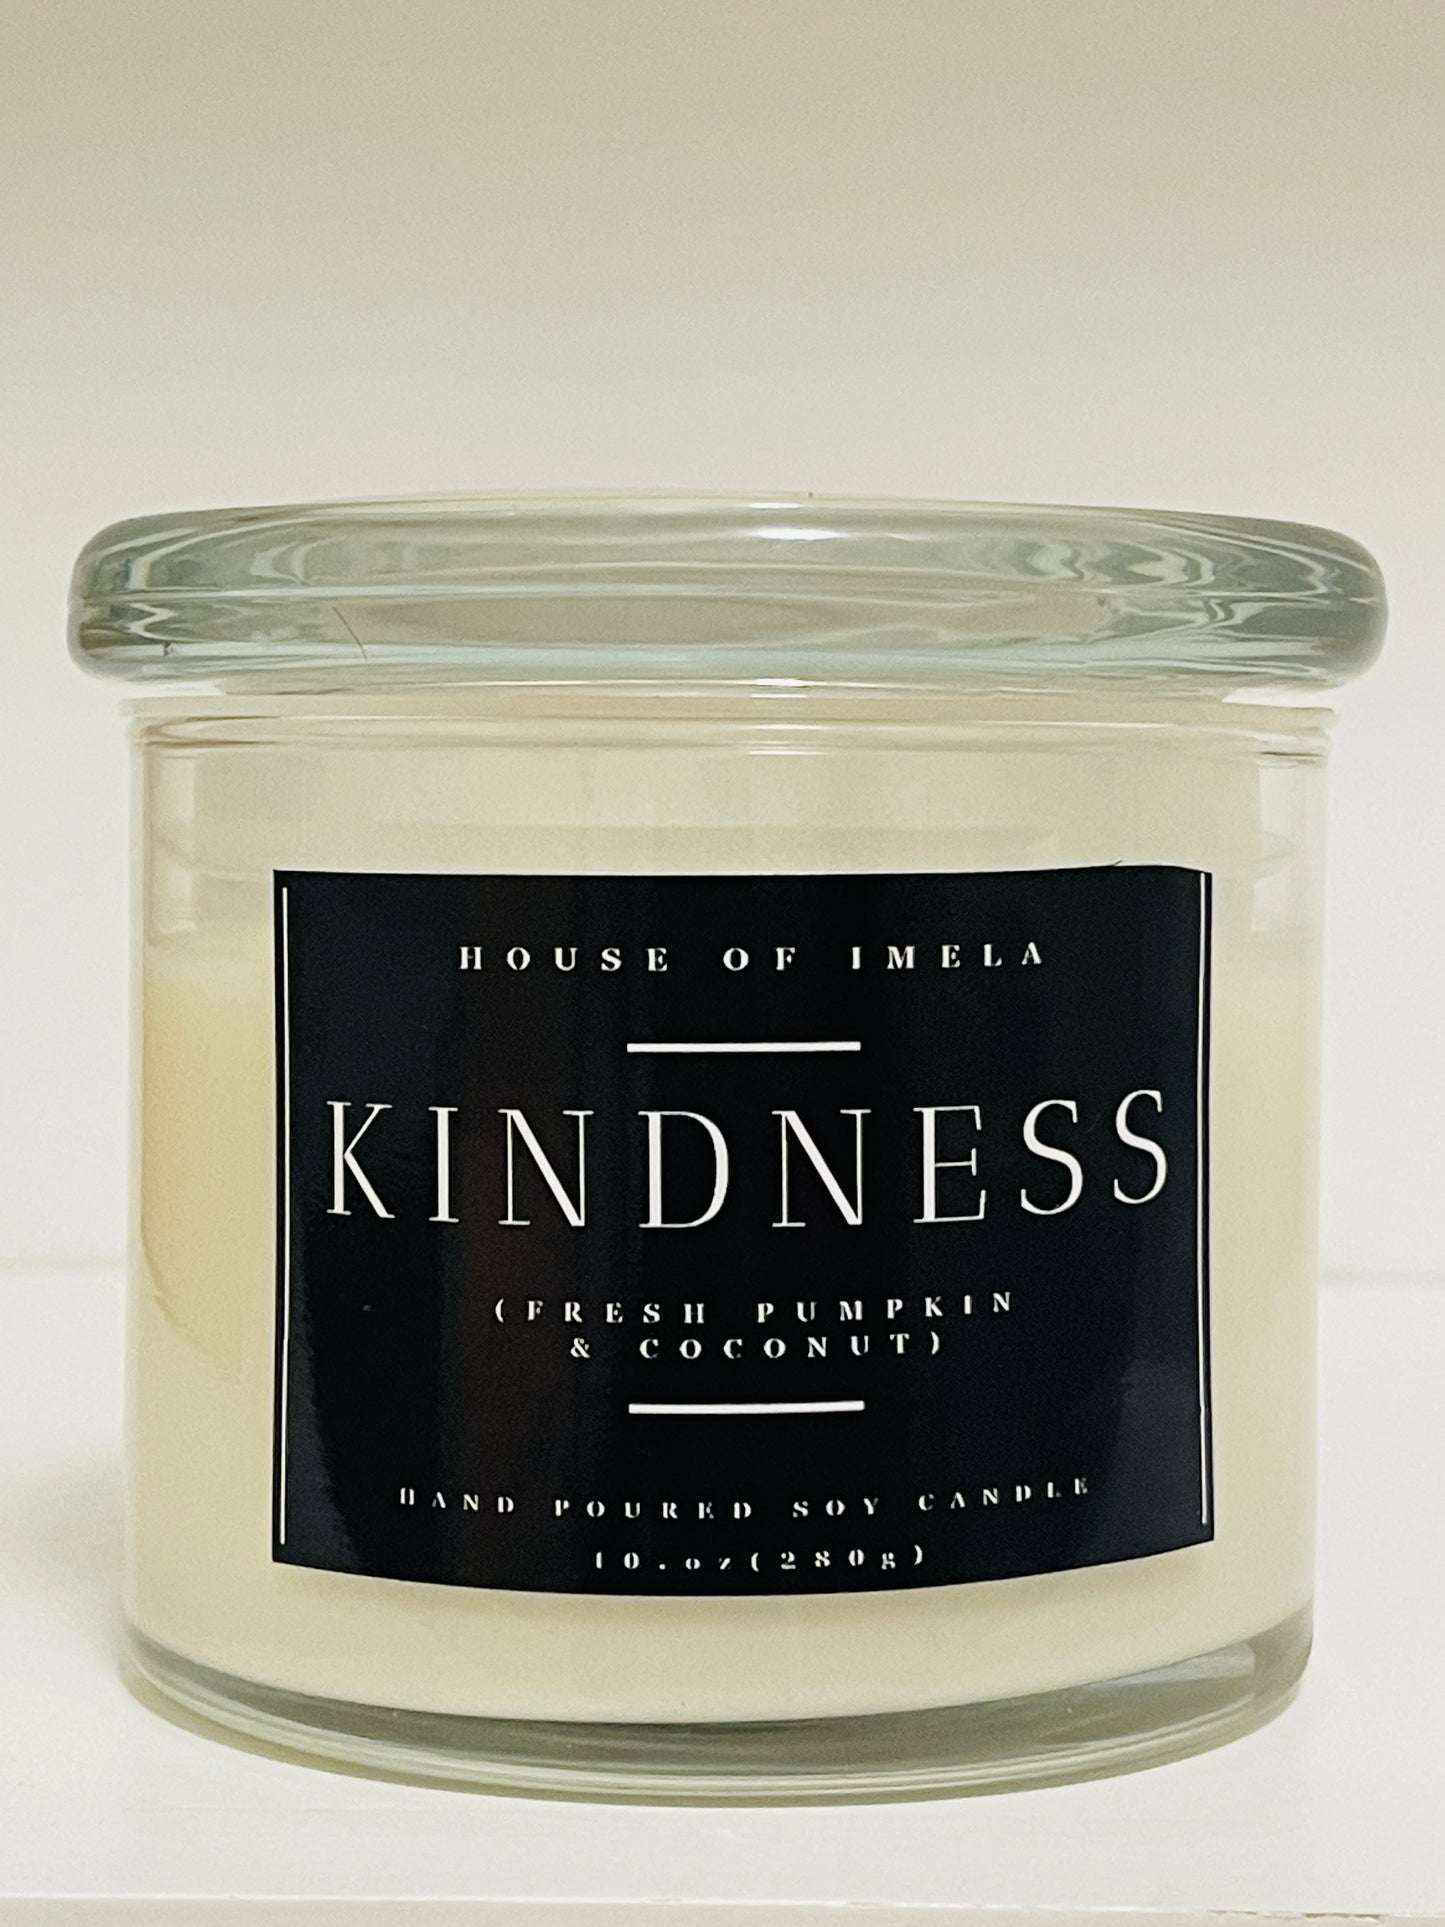 The 'Kindness' Candle - Fresh Pumpkin & Coconut